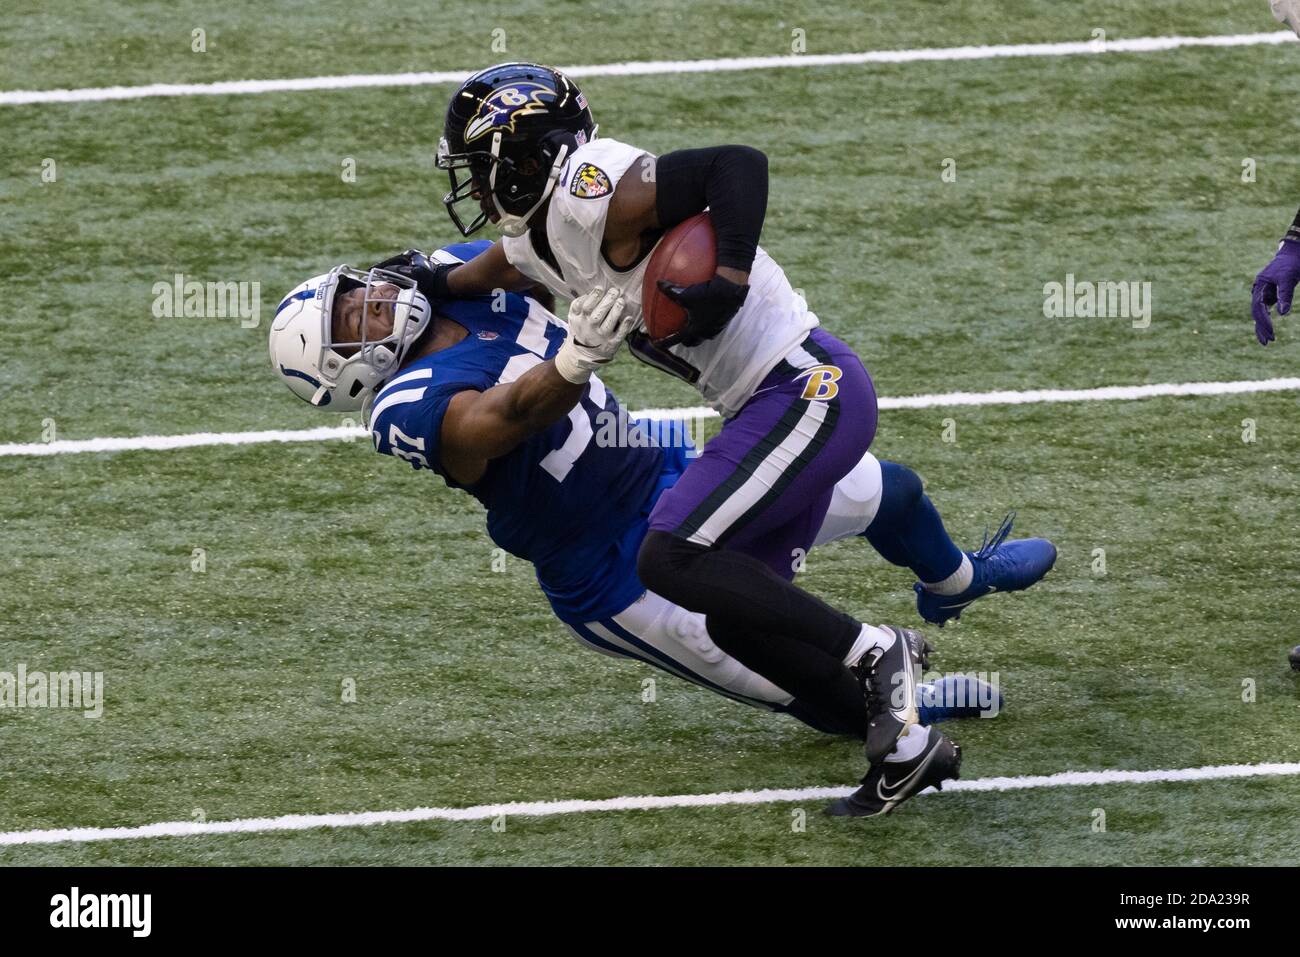 Indianapolis, Indiana, USA. 8th Nov, 2020. Baltimore Ravens wide receiver James Proche (11) stiff-arms Indianapolis Colts strong safety Khari Willis (37) after catching a pass during the game between the Baltimore Ravens and the Indianapolis Colts at Lucas Oil Stadium, Indianapolis, Indiana. Credit: Scott Stuart/ZUMA Wire/Alamy Live News Stock Photo